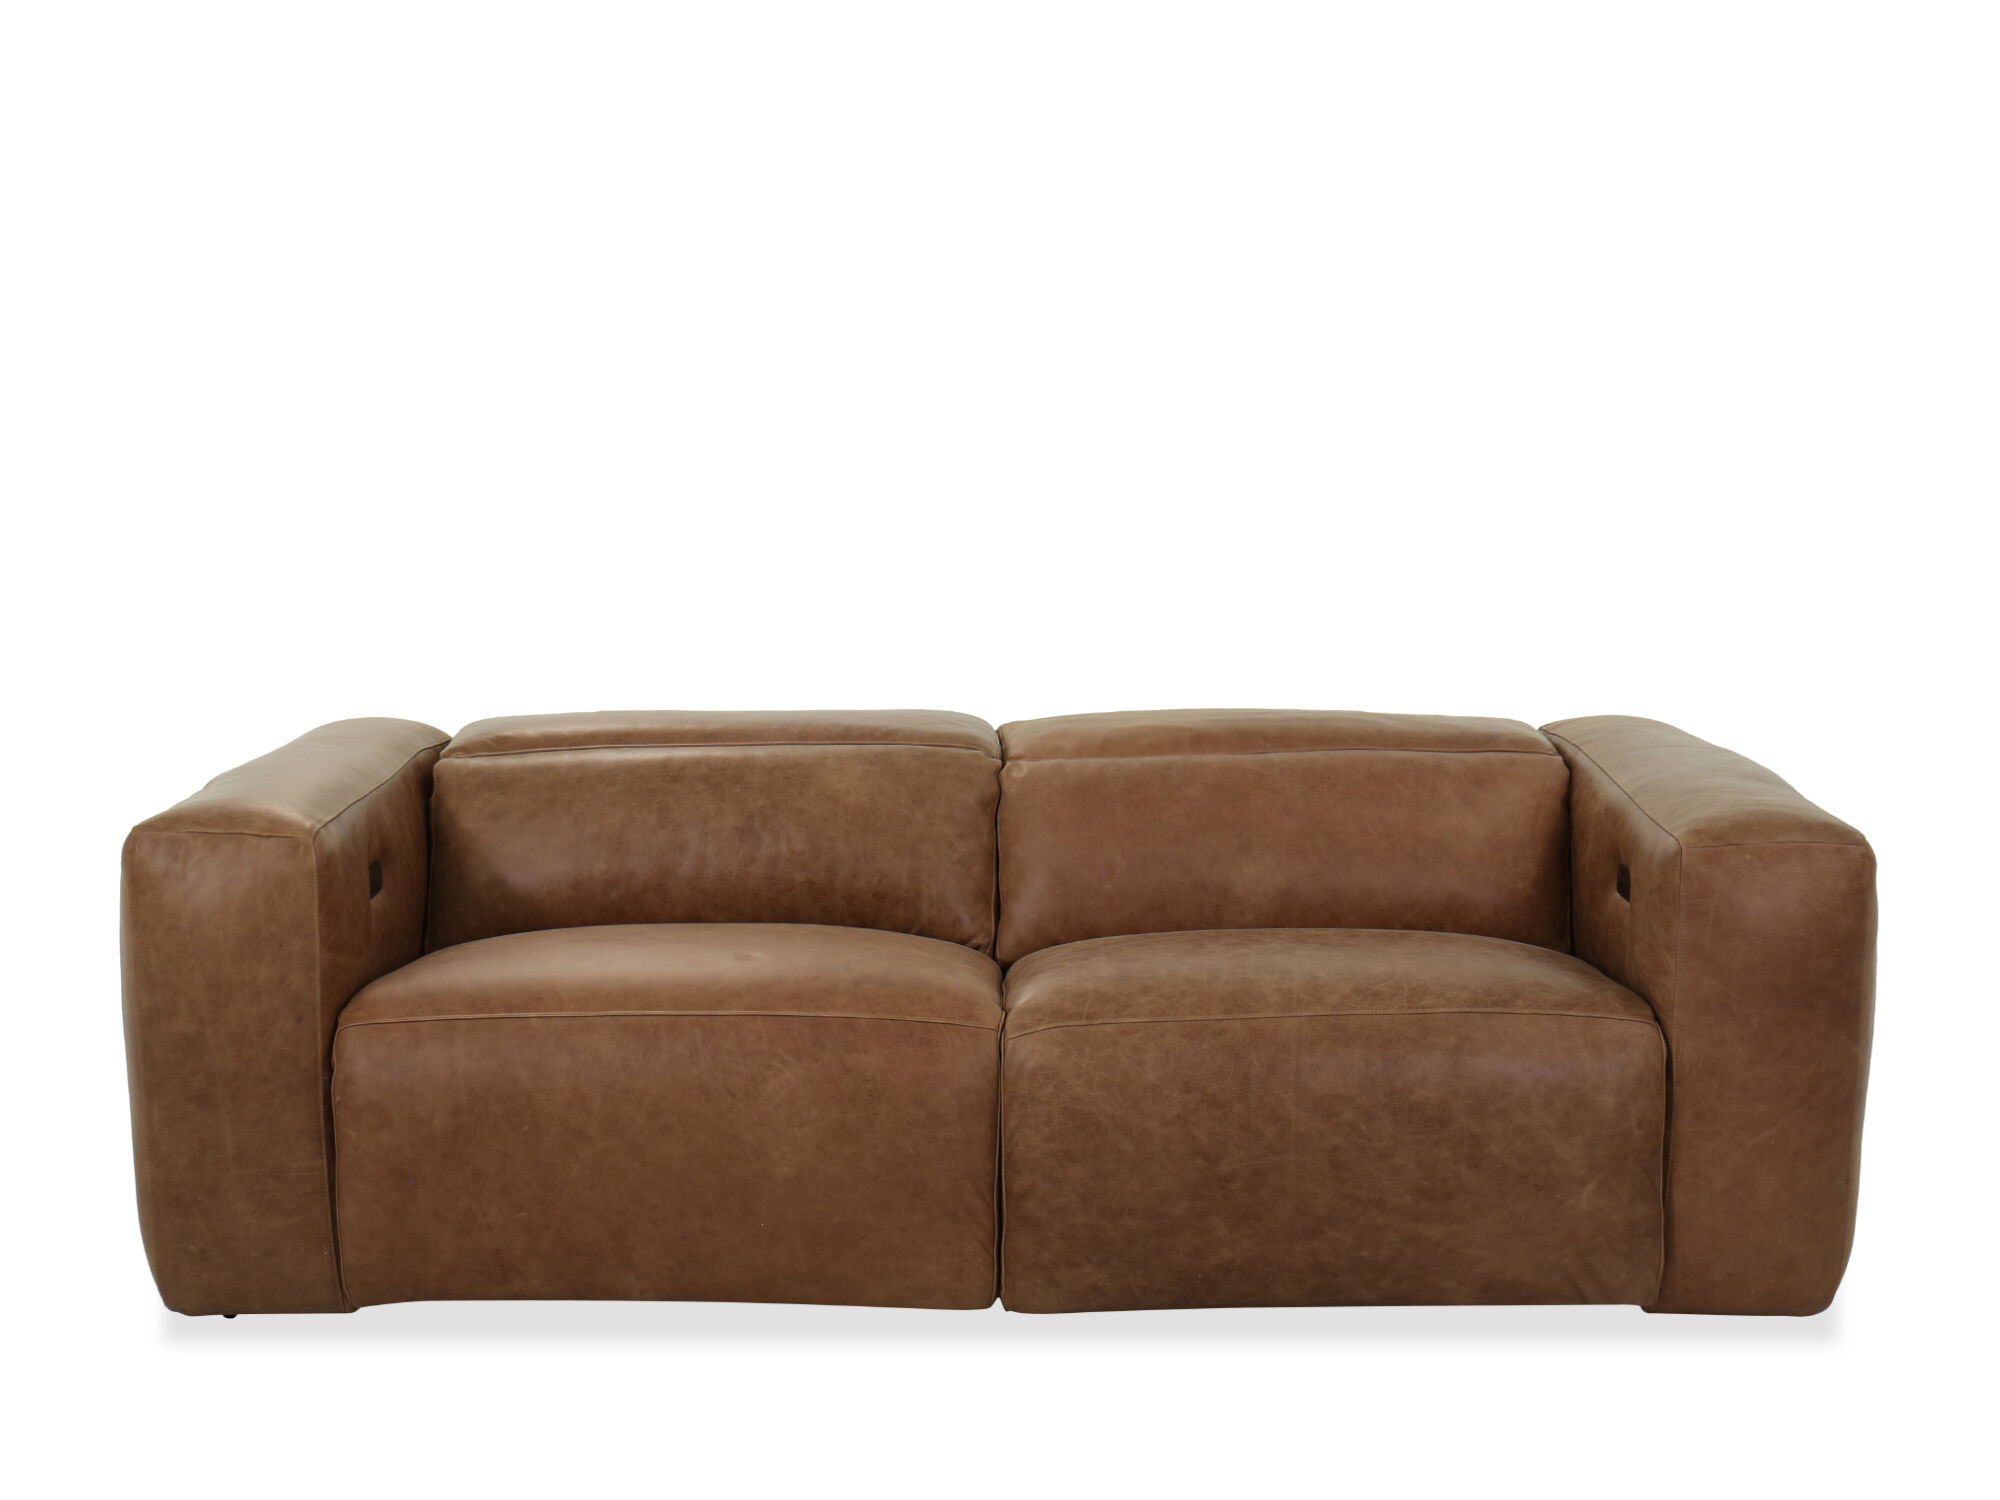 Cosmo Power Motion Sofa Mathis, Cosmo Leather Power Motion Reclining Sofa